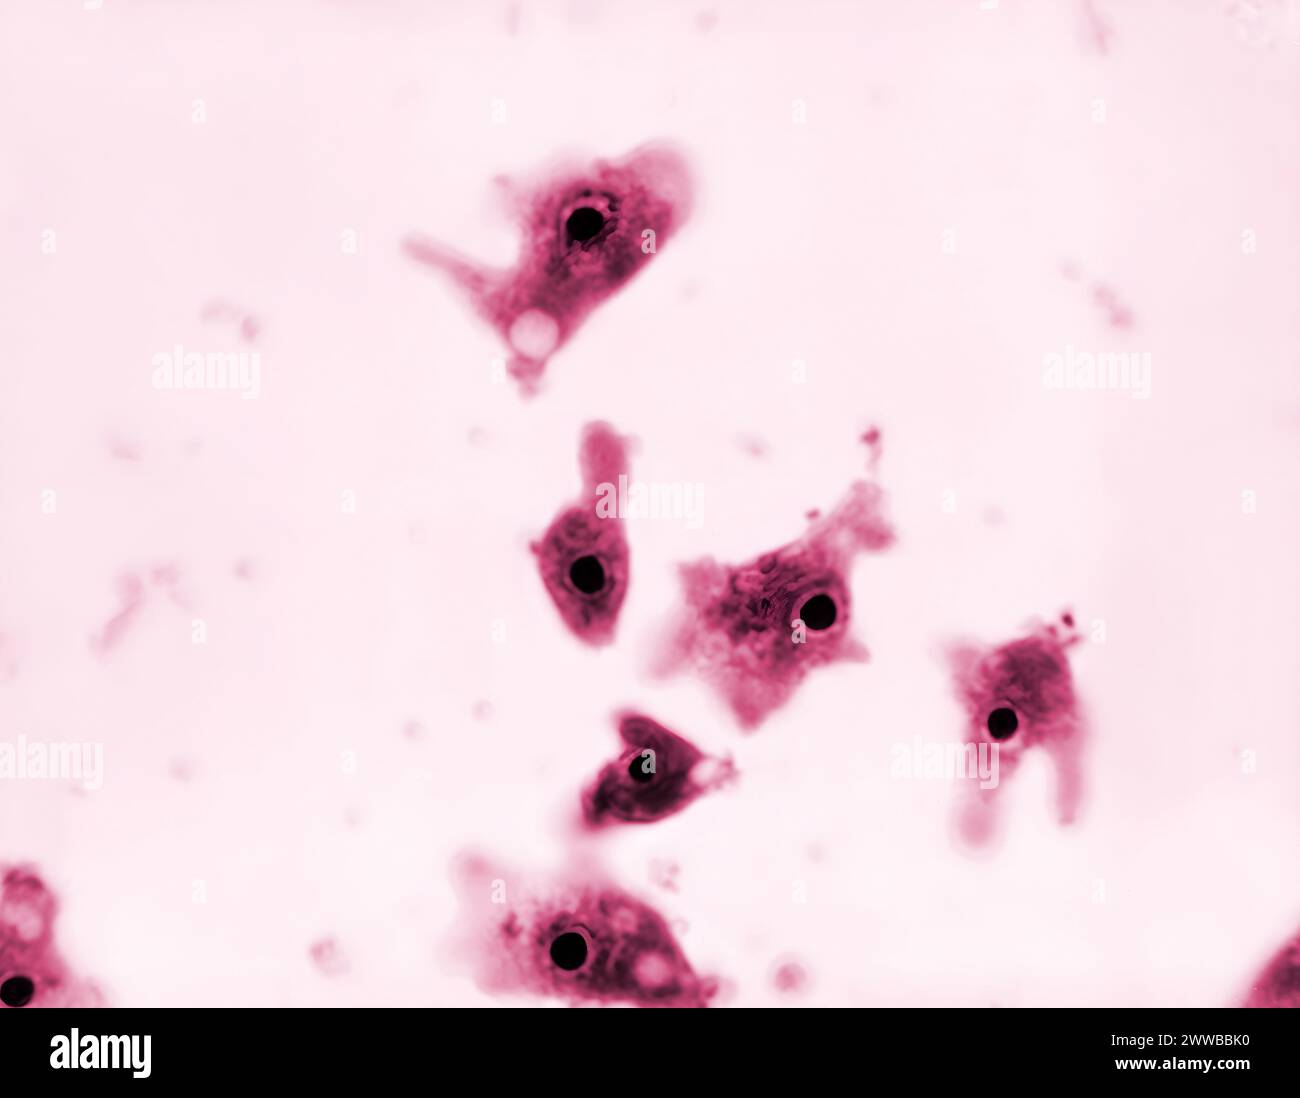 Under a magnification of 1750X, this photomicrograph of a nasal swab specimen, revealed the presence of numerous, trophozoite-staged amoebae. Stock Photo